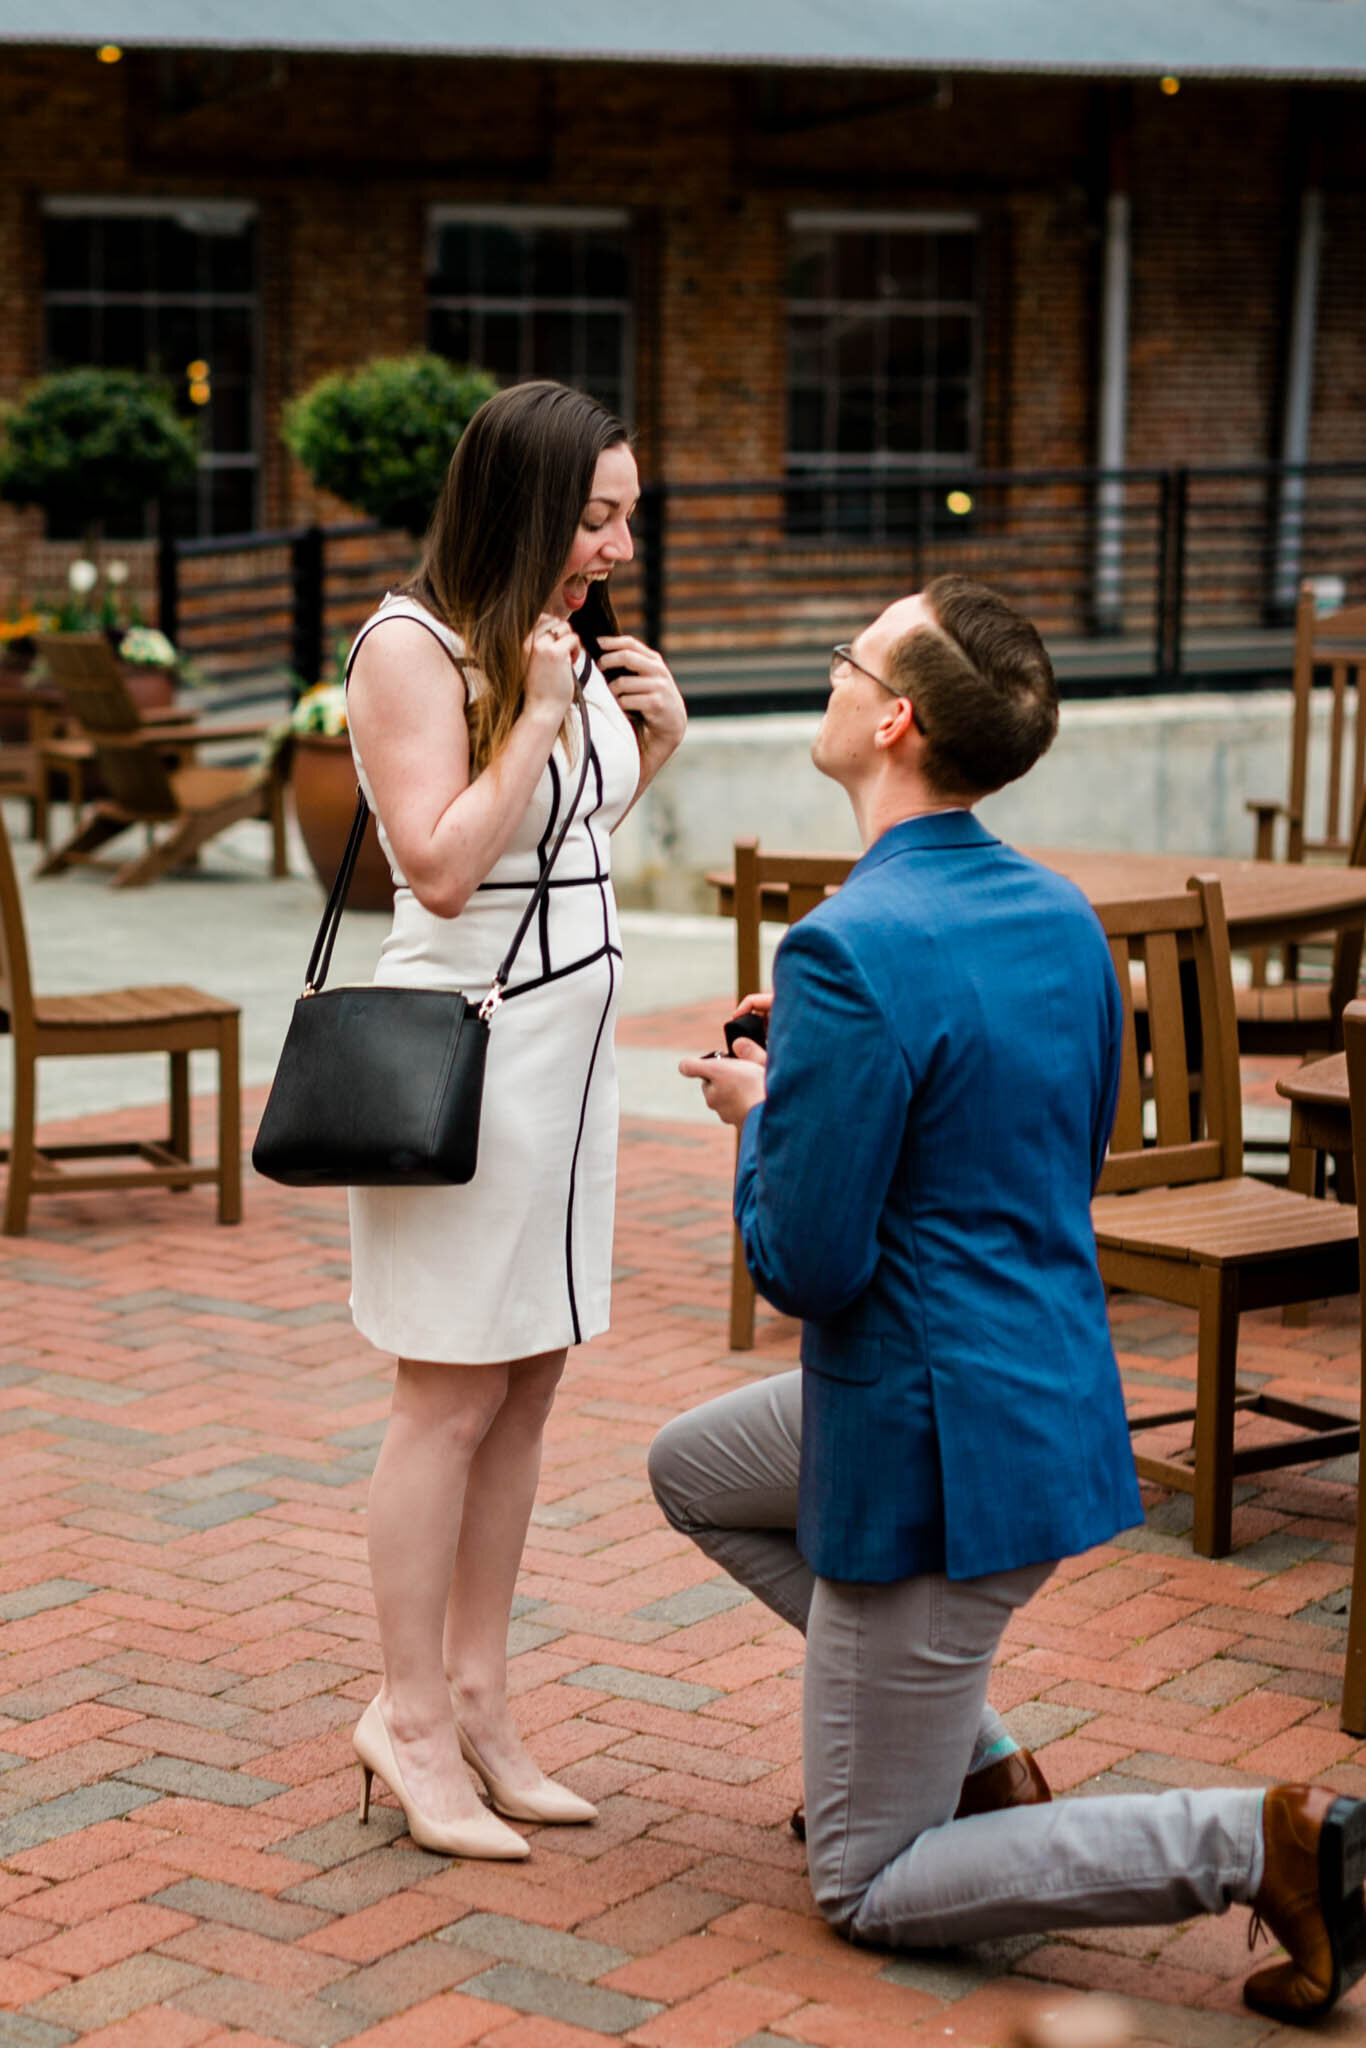 Durham Engagement Photographer | By G. Lin Photography | Woman with excited expression as man proposes